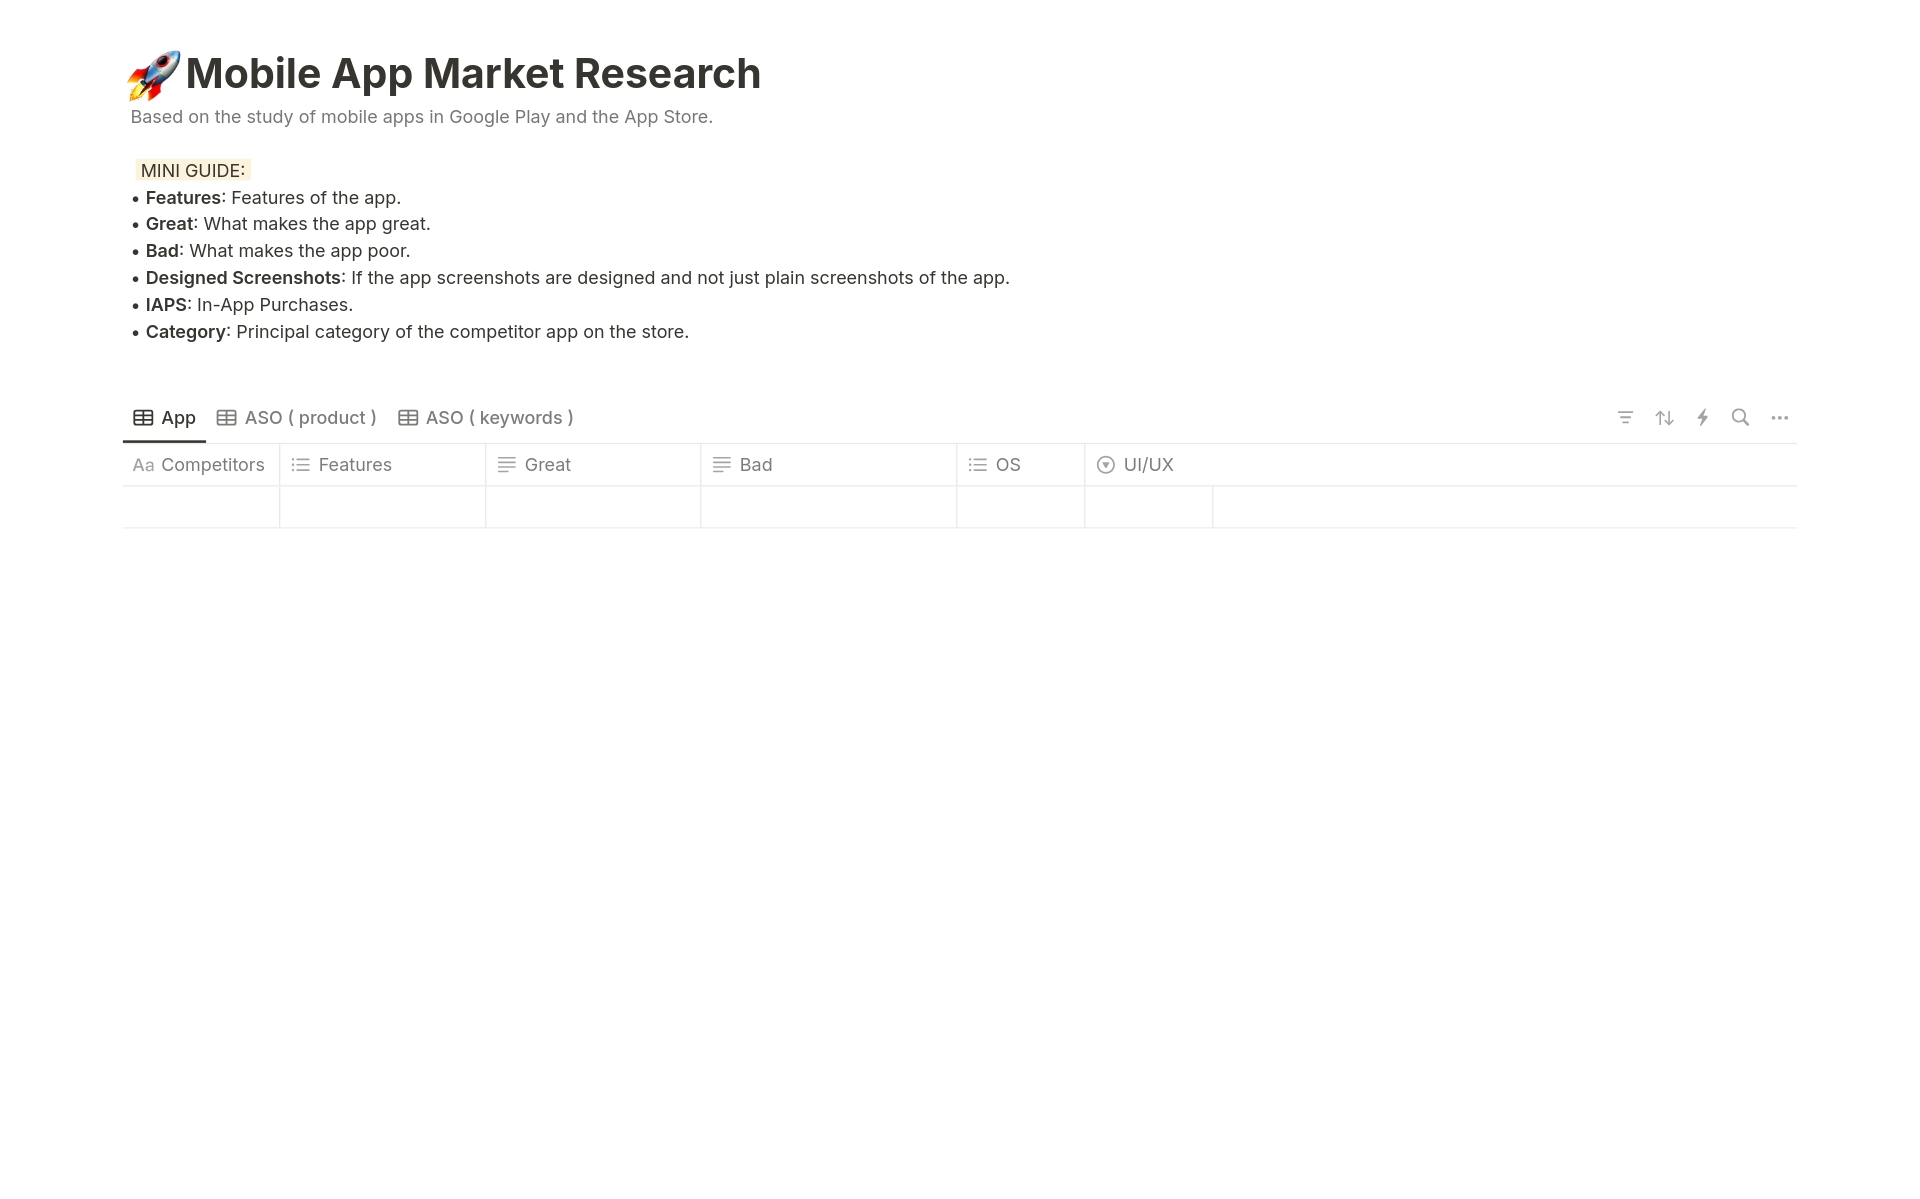 Track your competition and discover market trends with our Mobile App Market & ASO Study Template. Gain insights, identify similarities, and truly understand your product for better performance and visibility. Perfect for in-depth research of the mobile app market for developers.